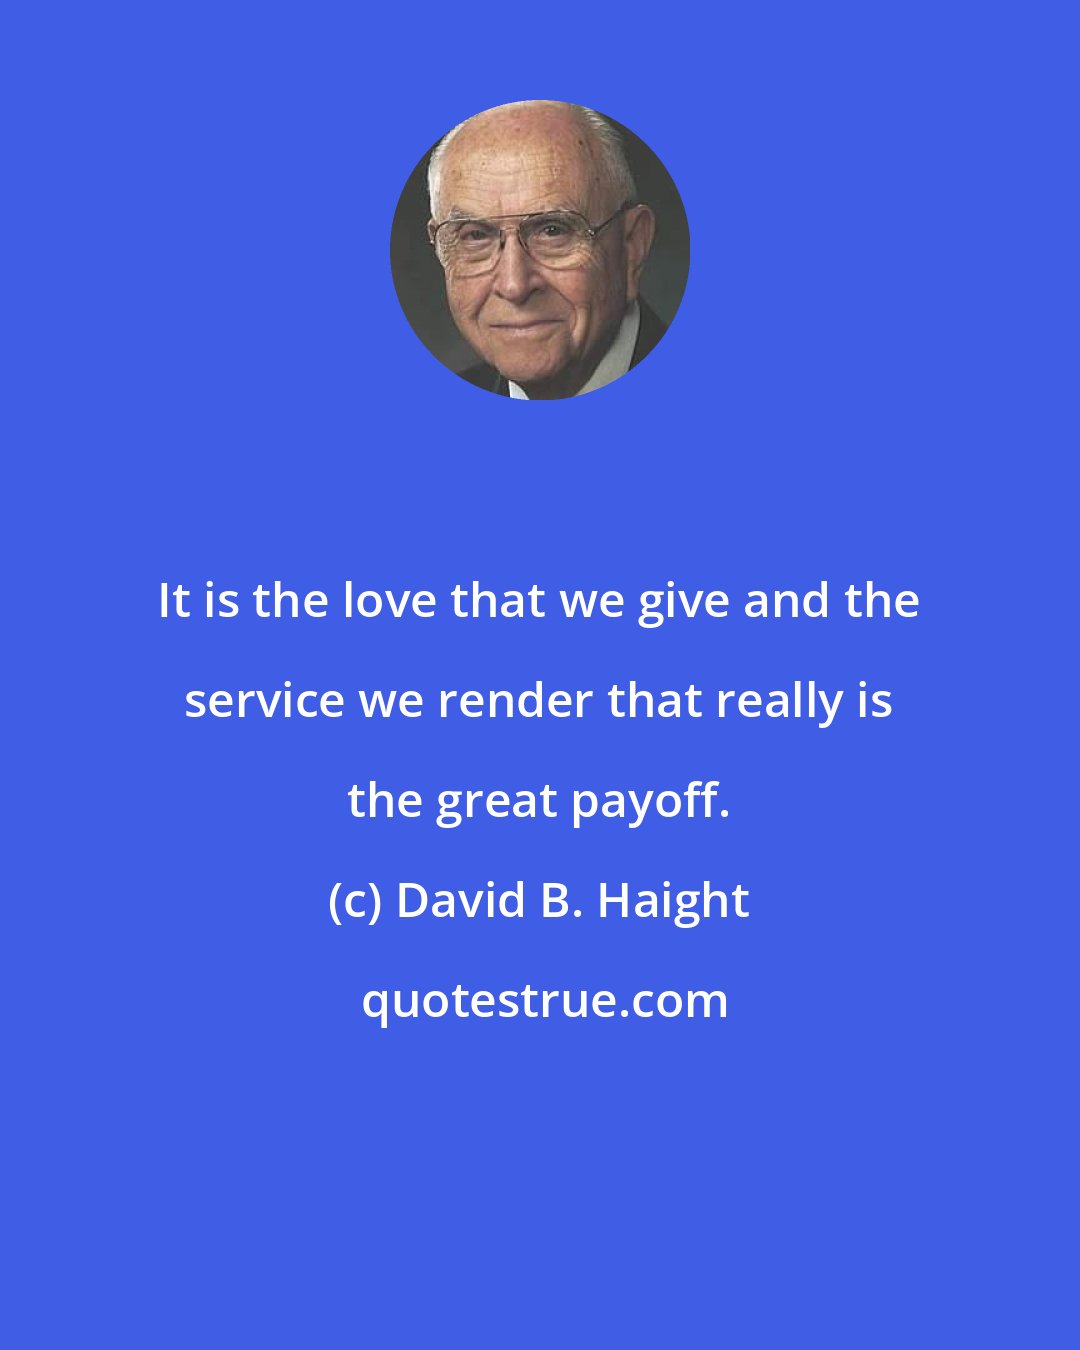 David B. Haight: It is the love that we give and the service we render that really is the great payoff.